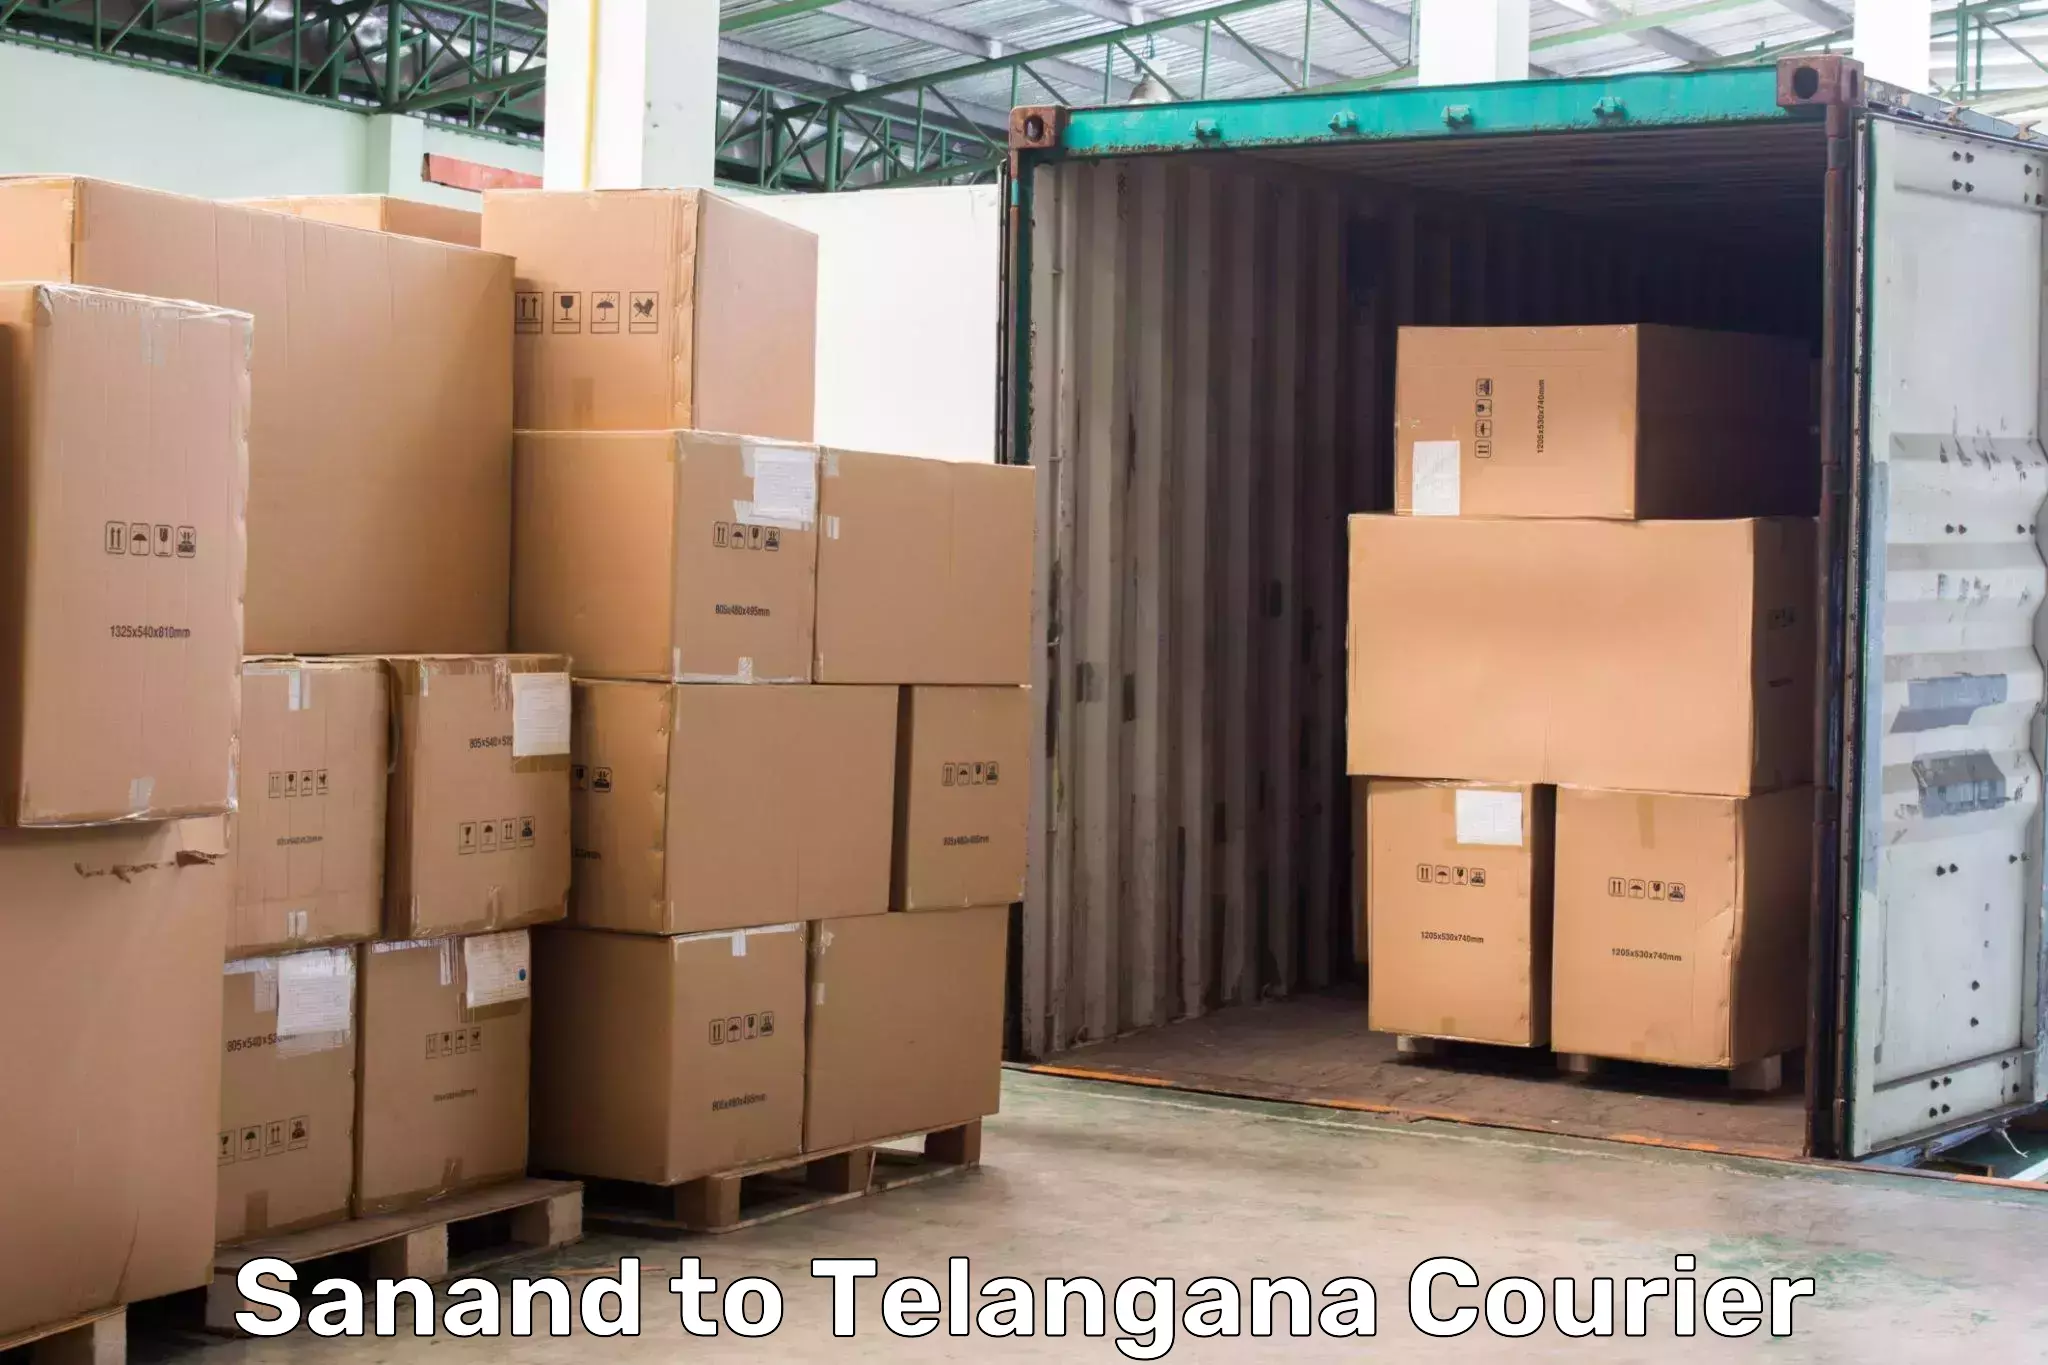 Courier service efficiency Sanand to Yellareddy